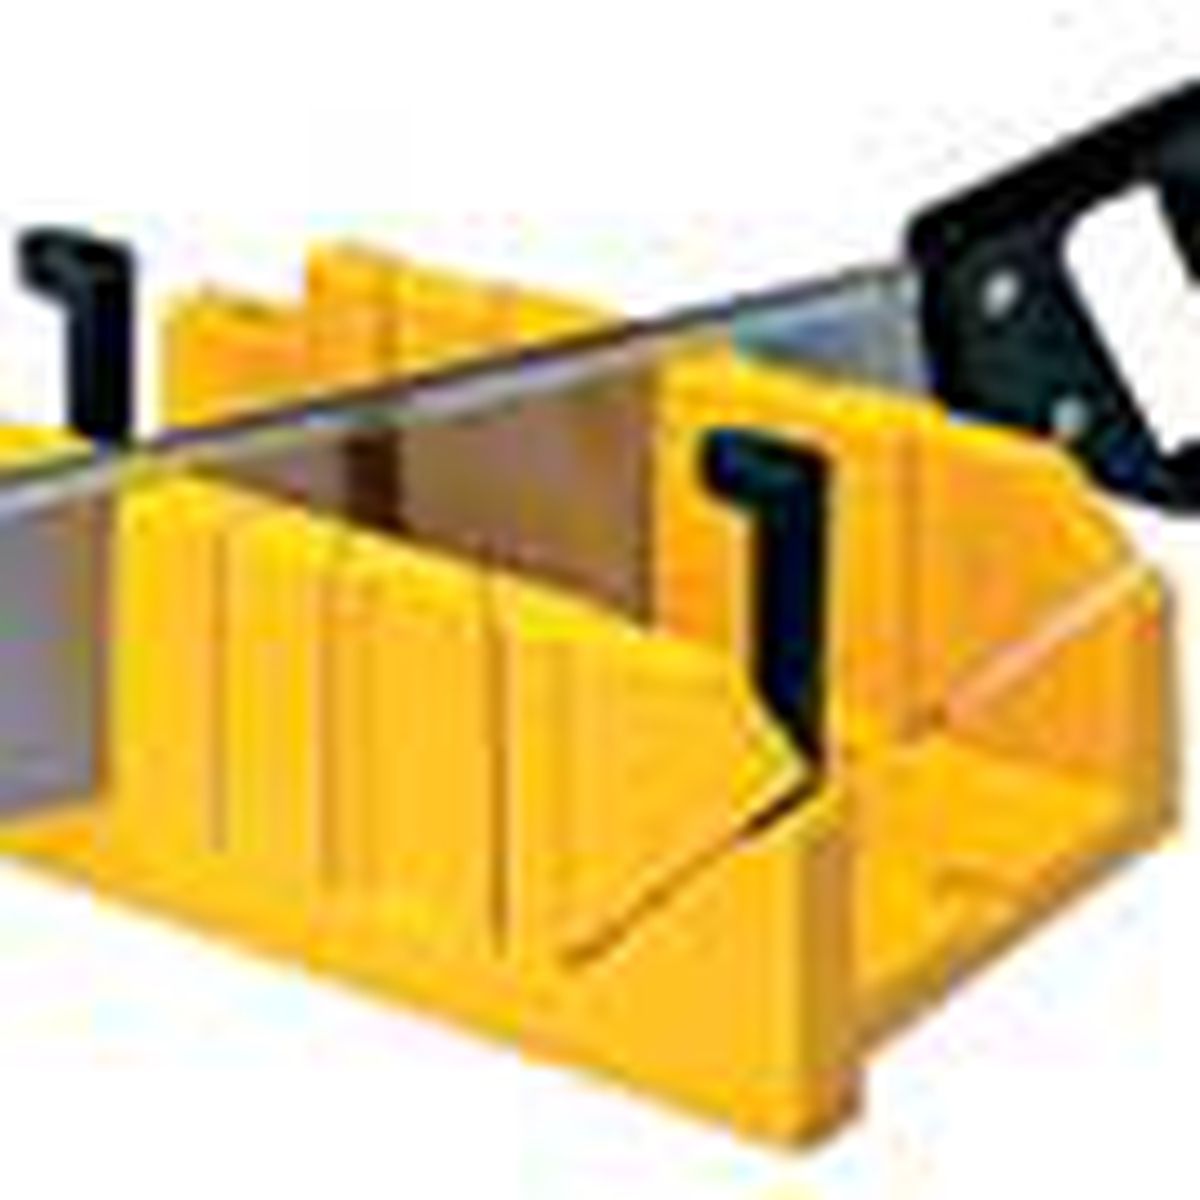 miterbox with saw